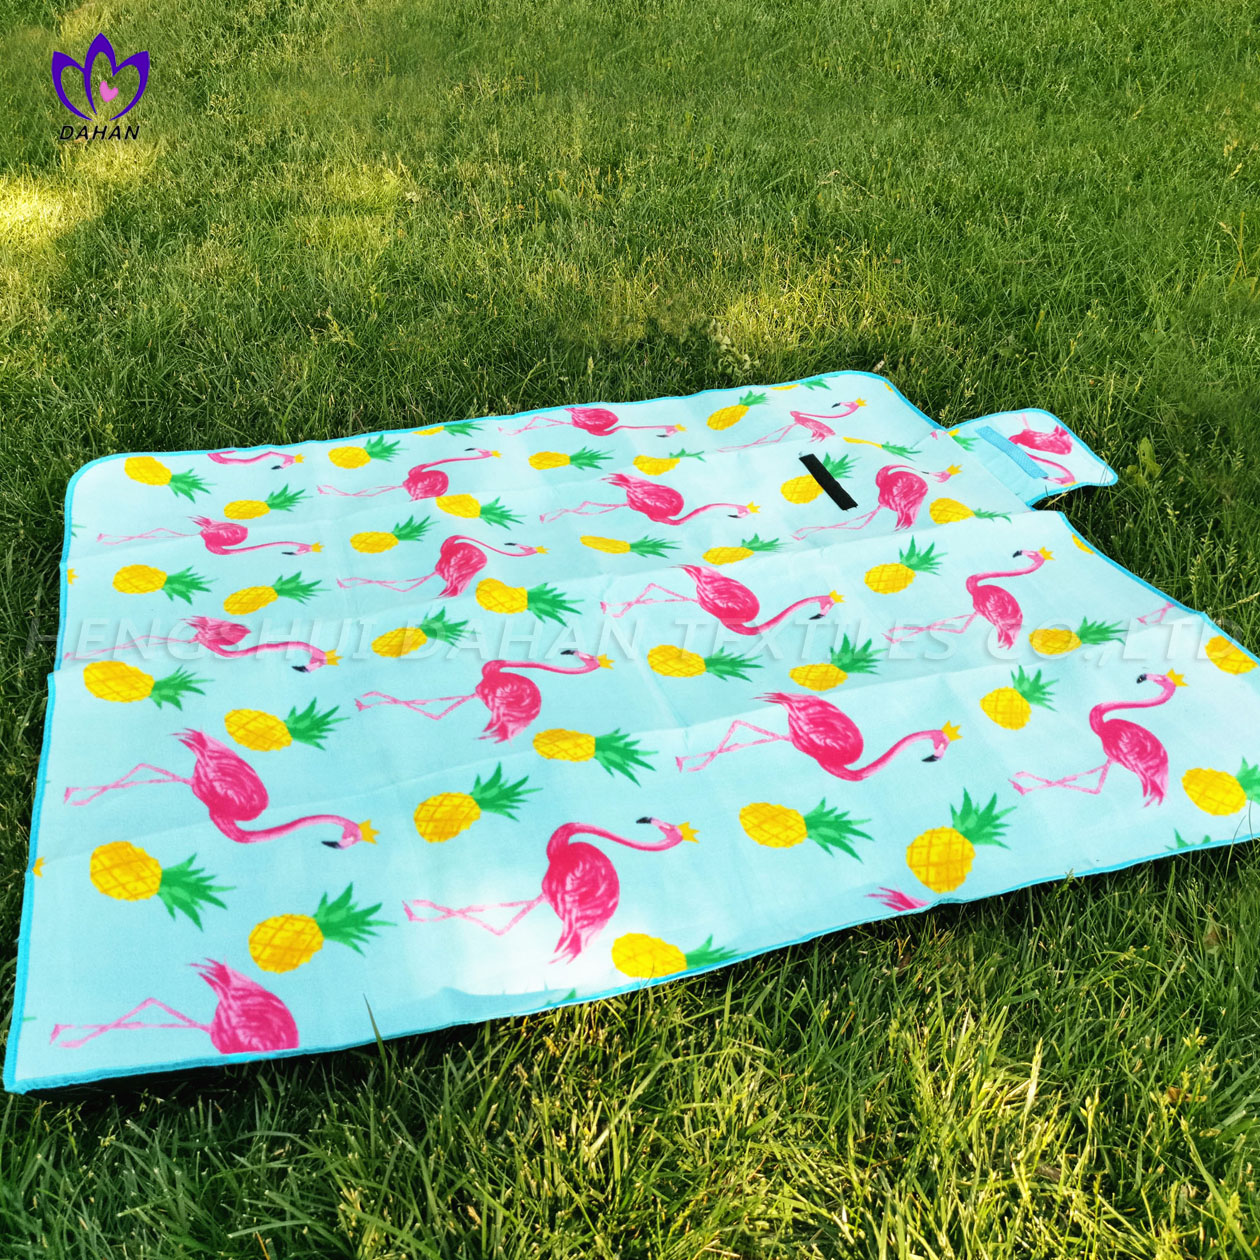 Blanket waterproof picnic mat with printing. PC21